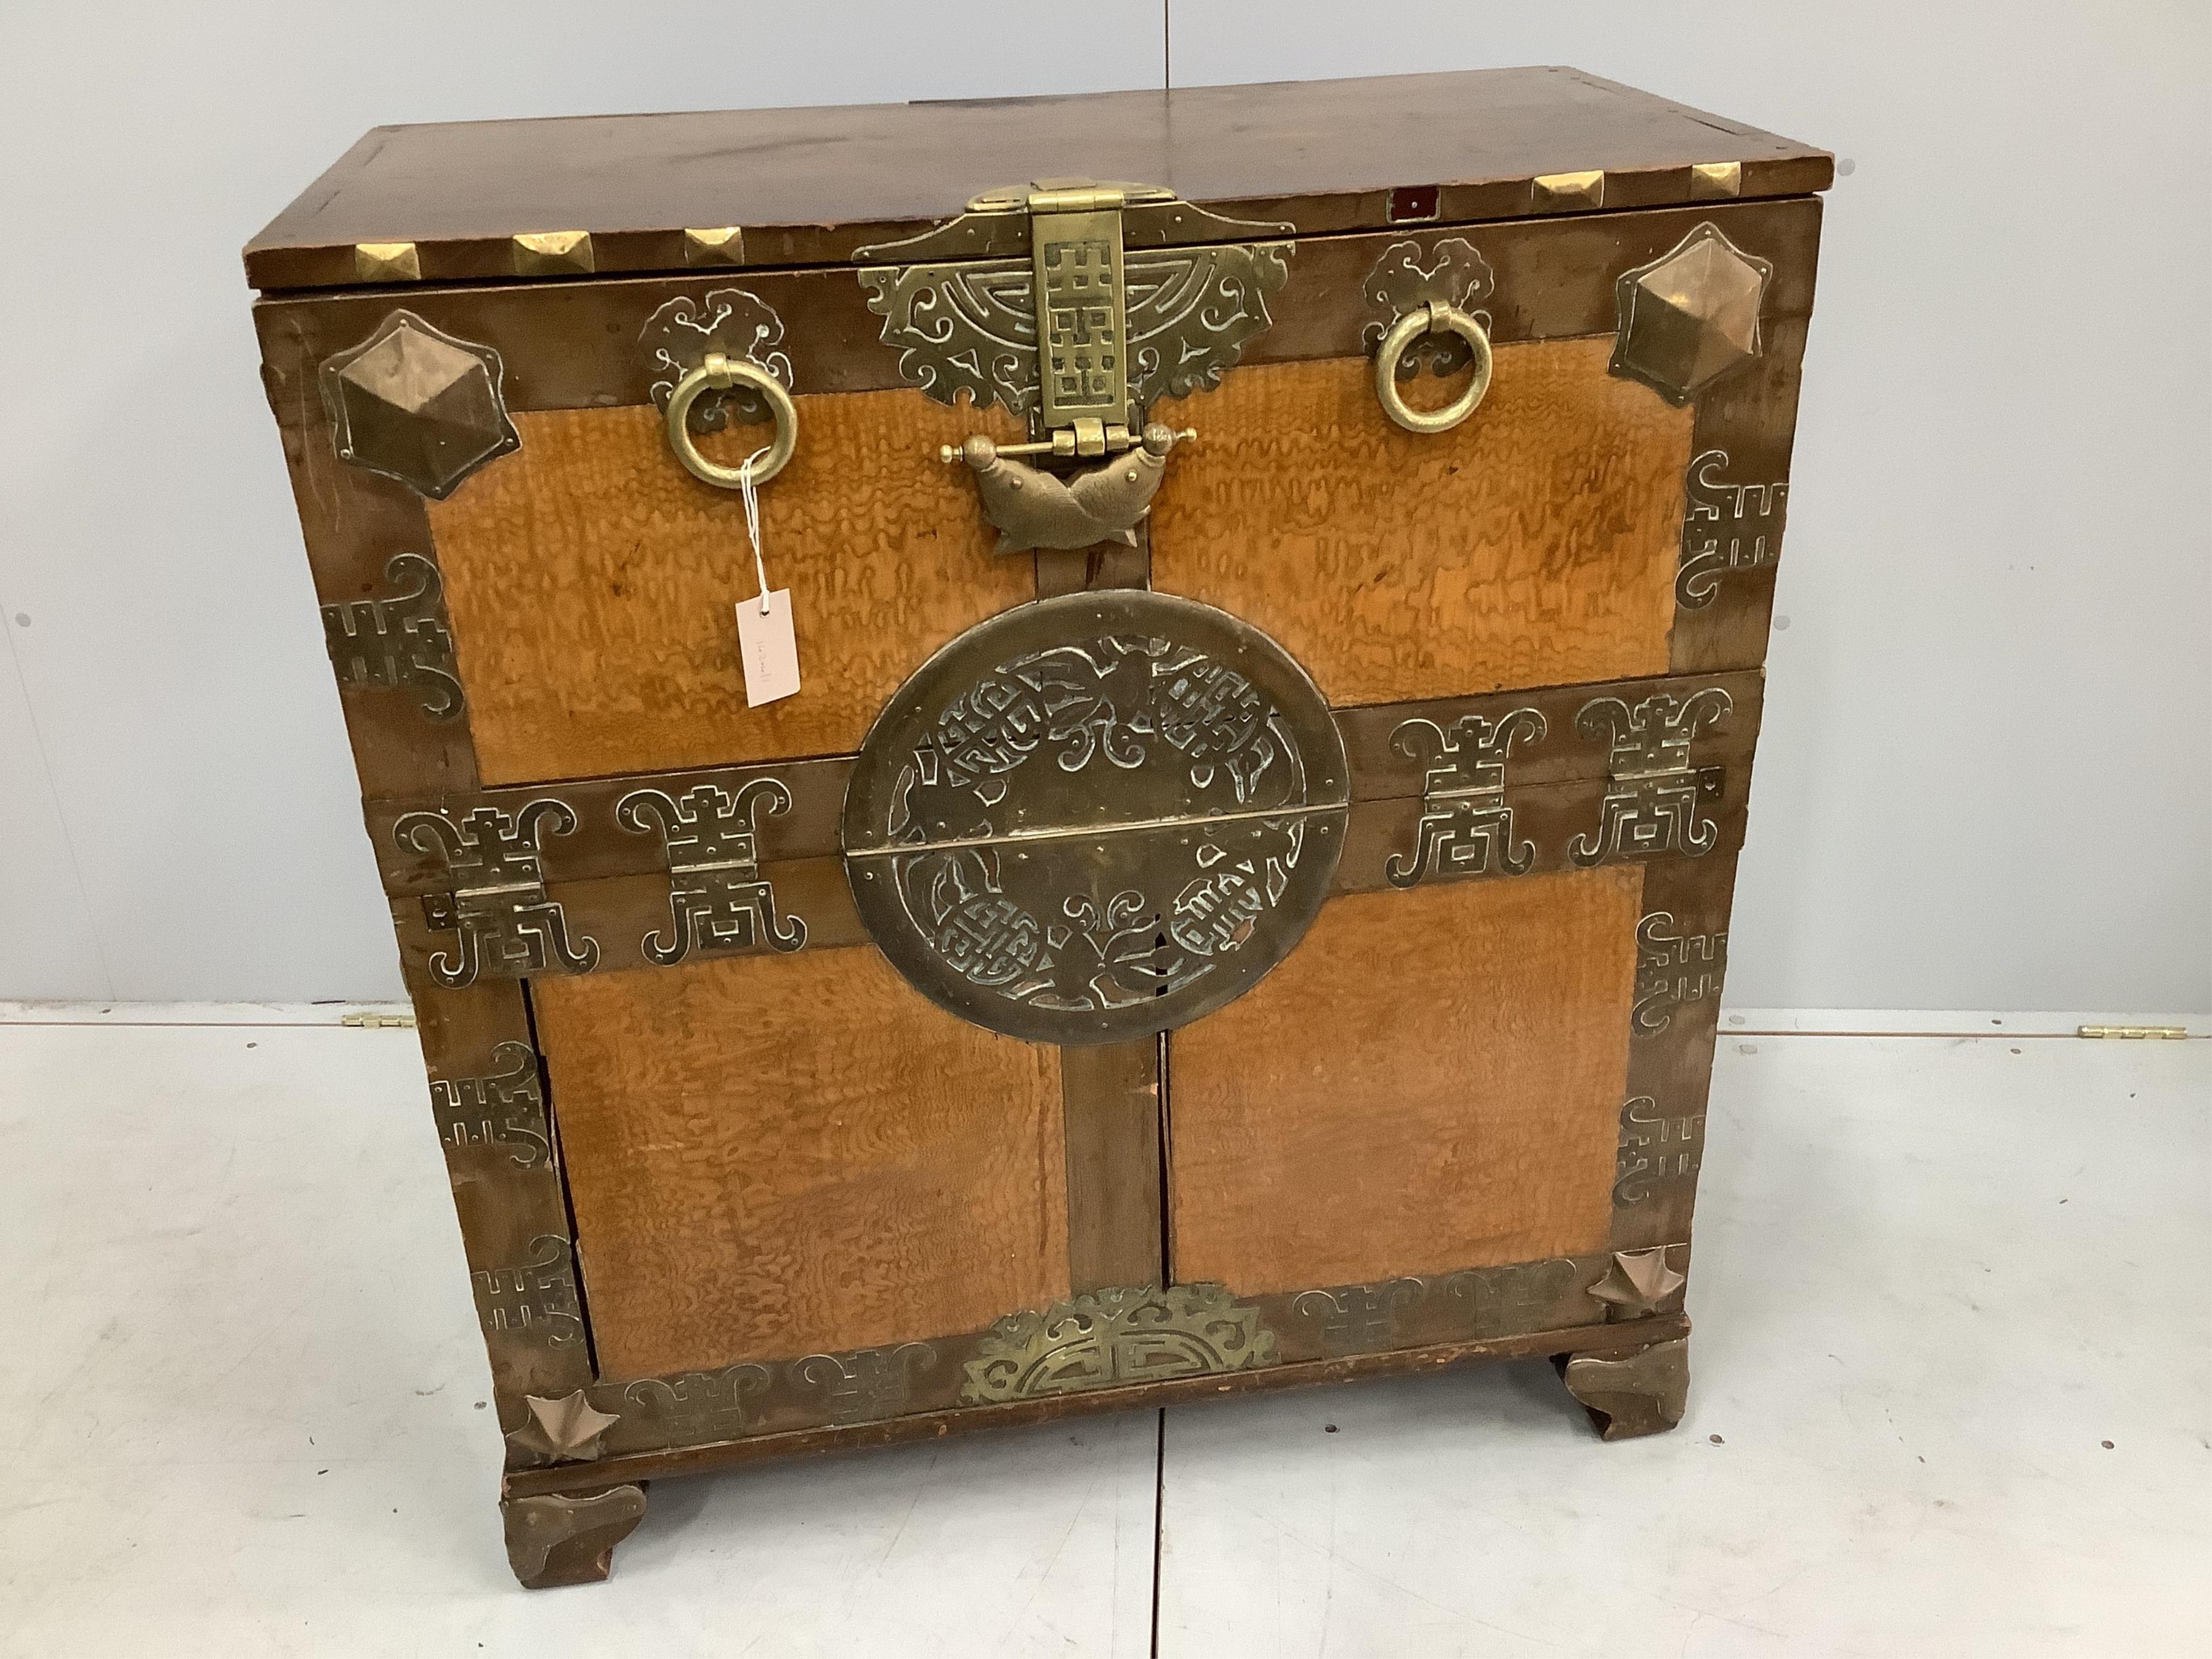 A Chinese brass mounted chest, width 90cm, depth 45cm, height 100cm